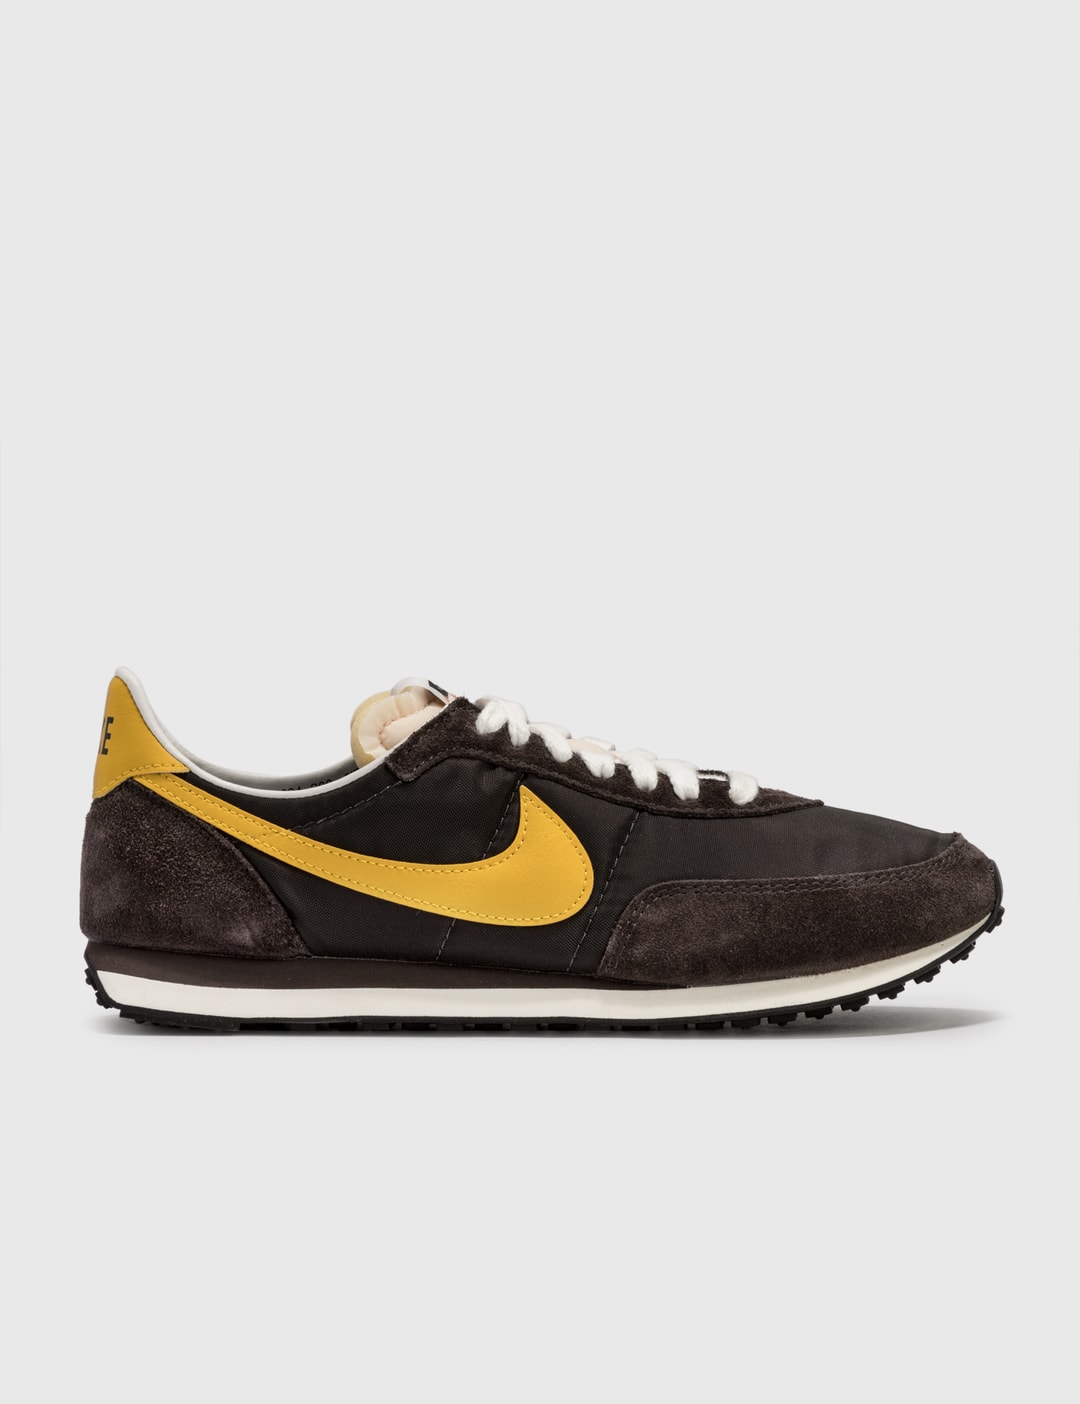 Nike the waffle trainer - Nike Waffle Trainer 2 SP | HBX - Globally Curated Fashion